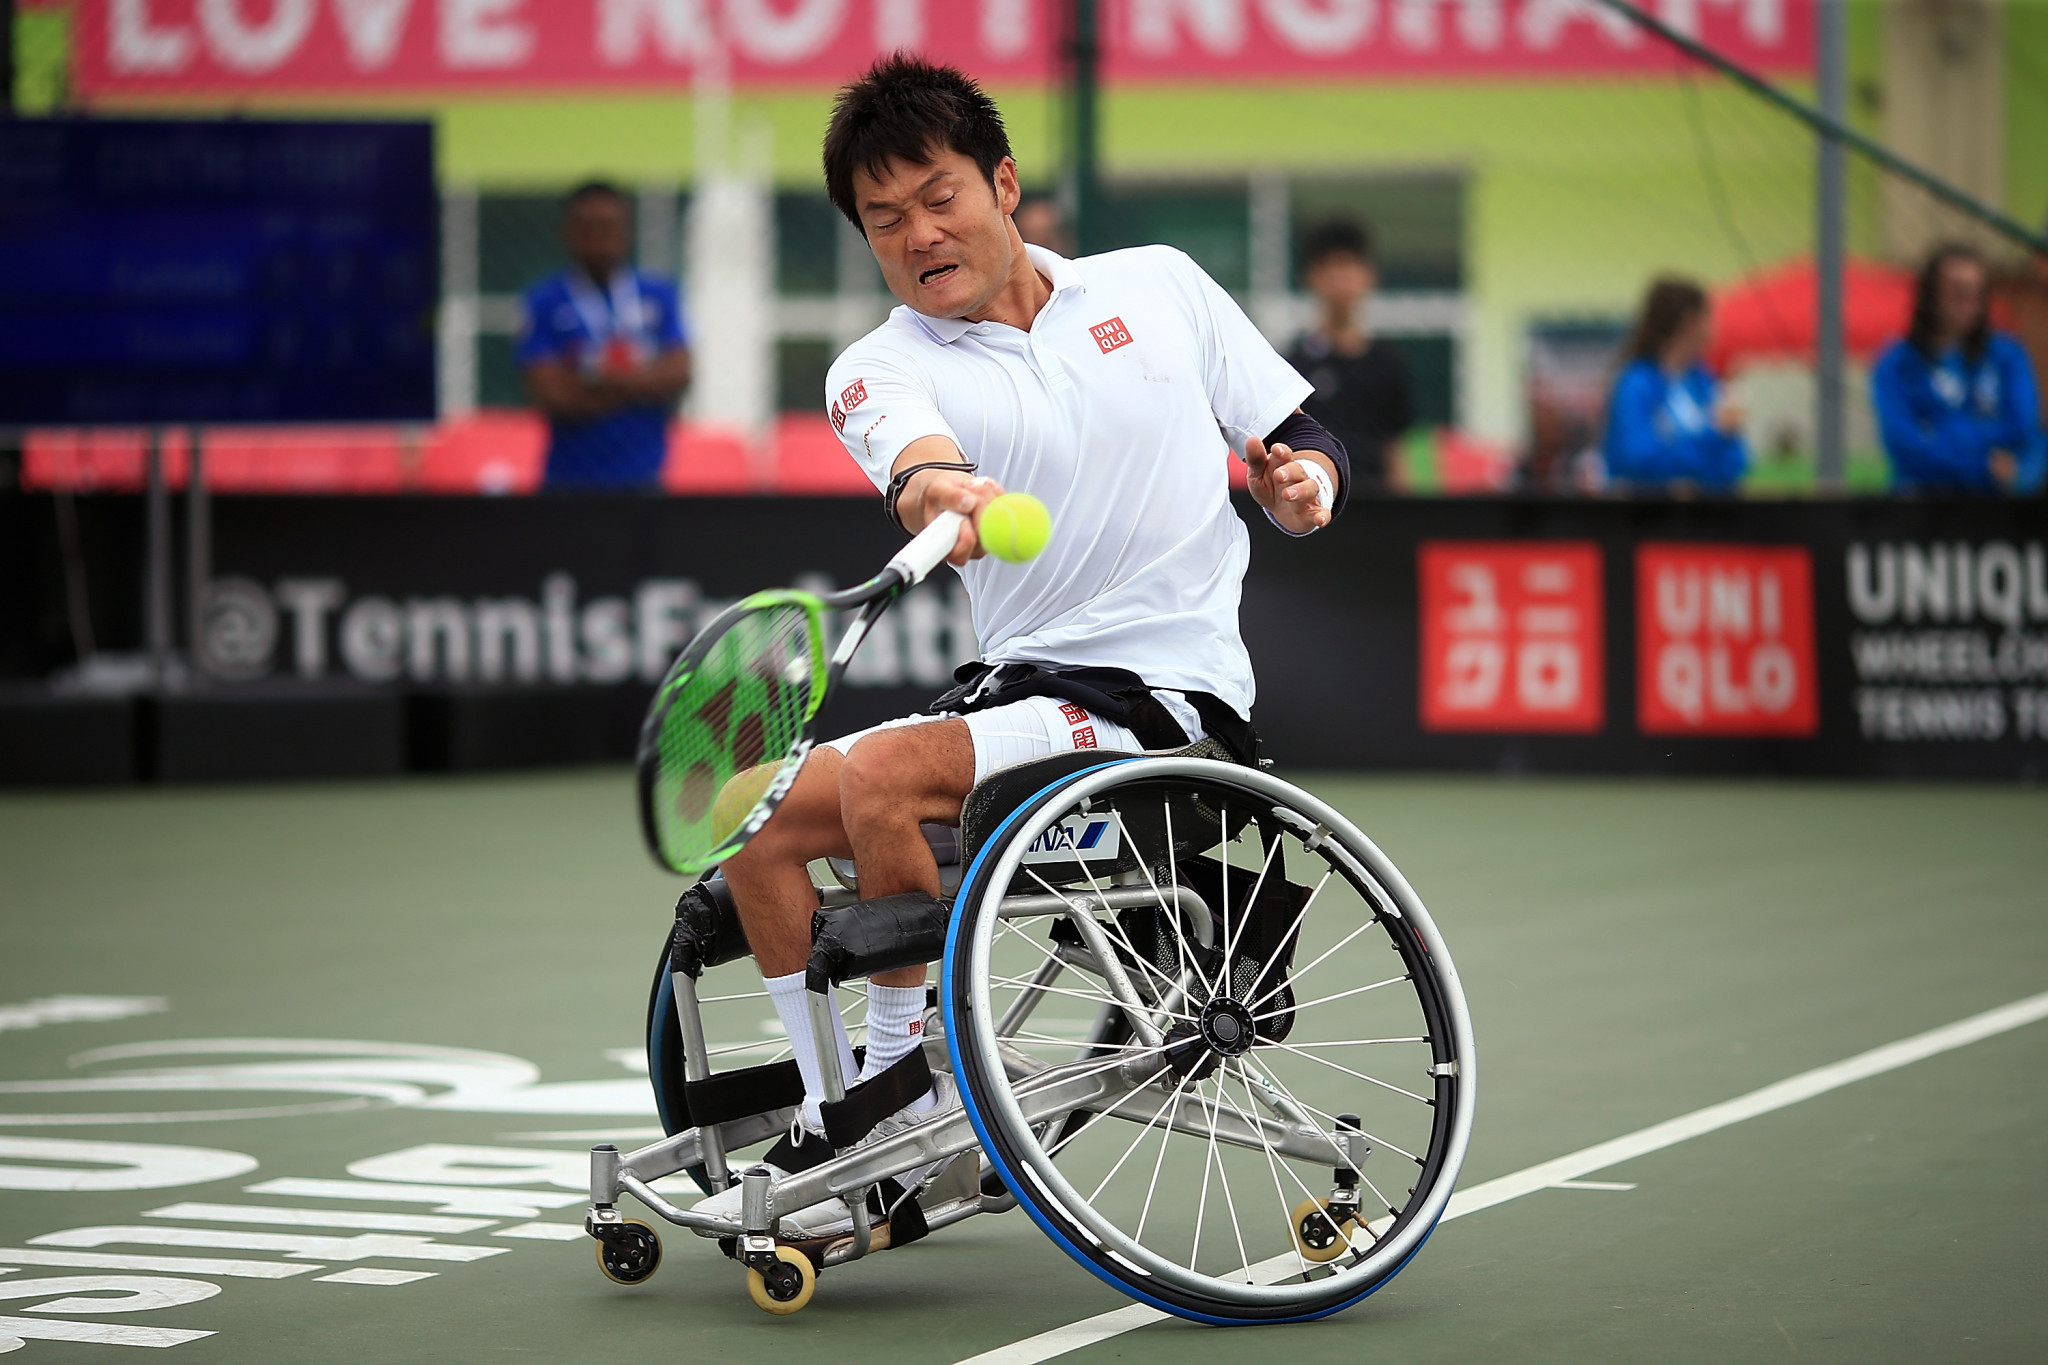 Japan's Shingo Kunieda has been announced to compete at the NEC Wheelchair Tennis Masters in Orlando ©Getty Images